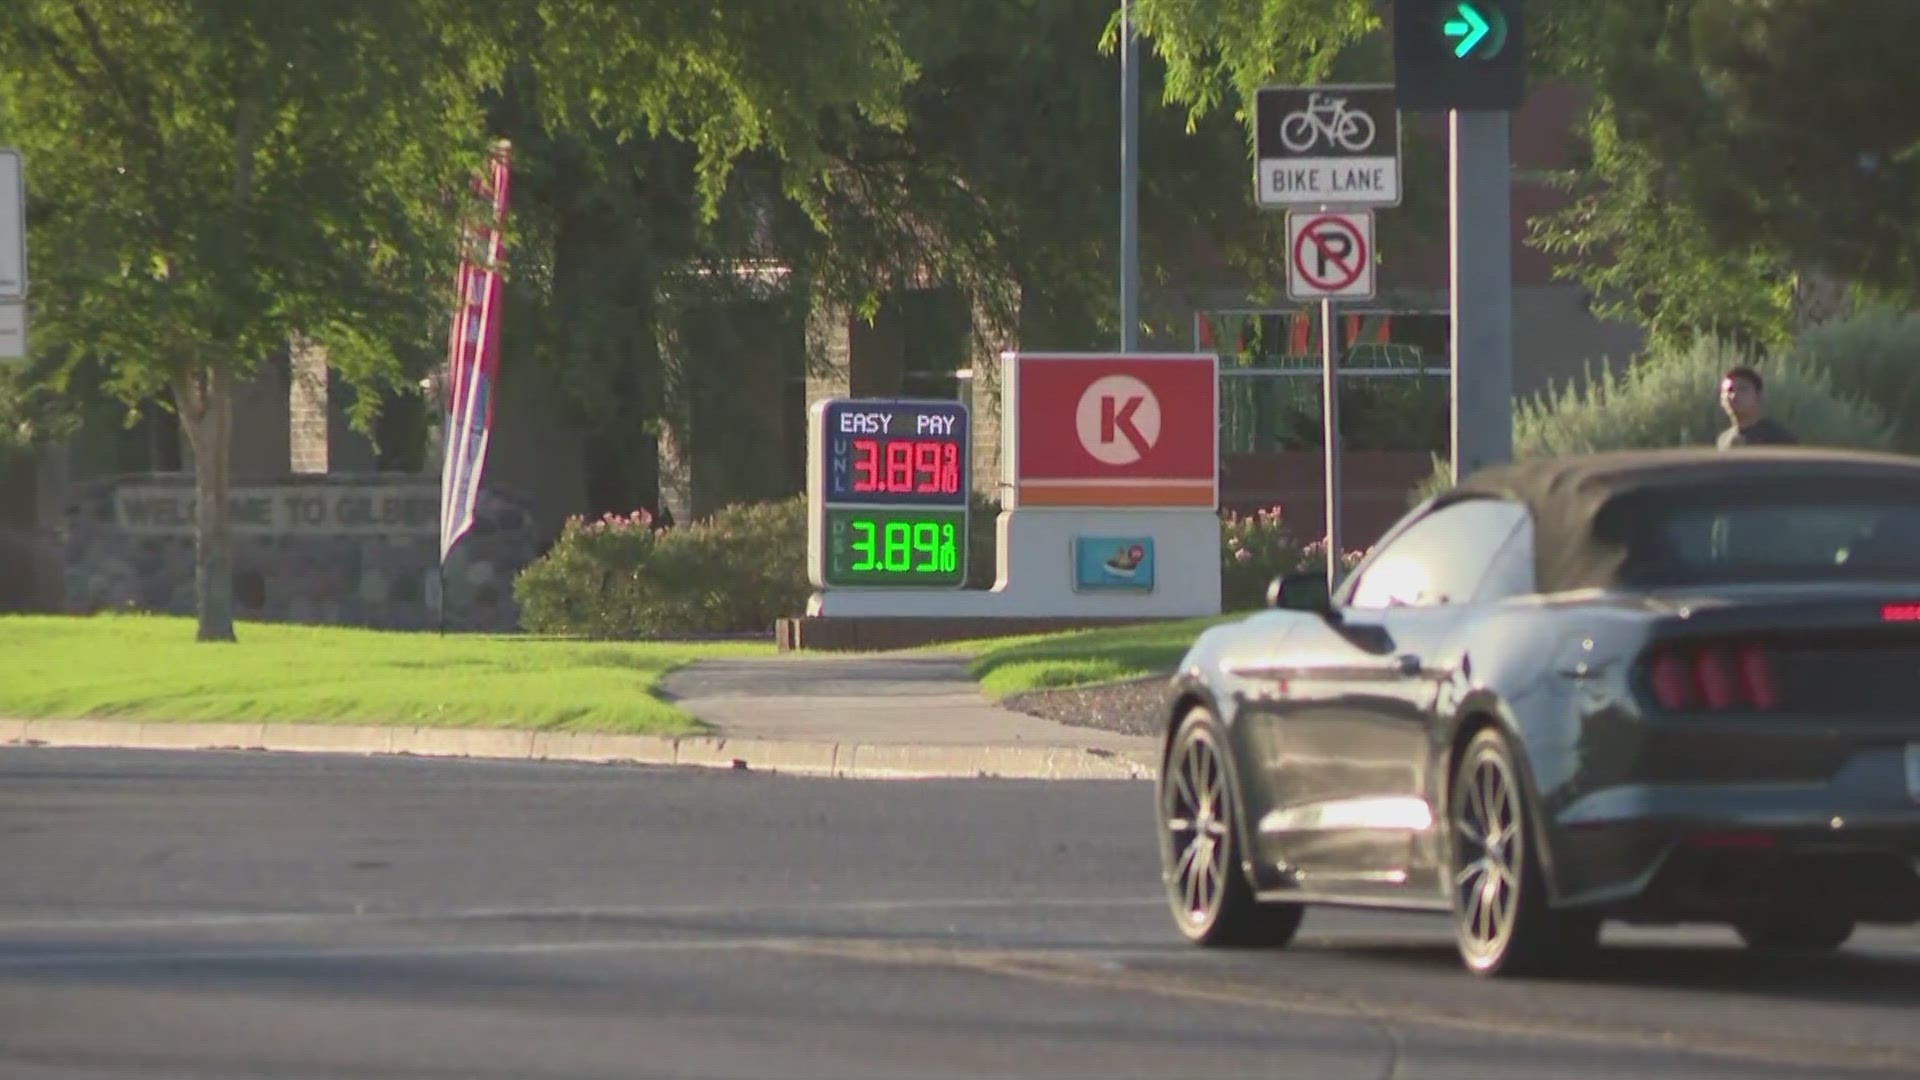 The average price for a gallon of gas in Arizona is about $3.90. That’s $.07 higher than the national average, which is $3.83 a gallon.